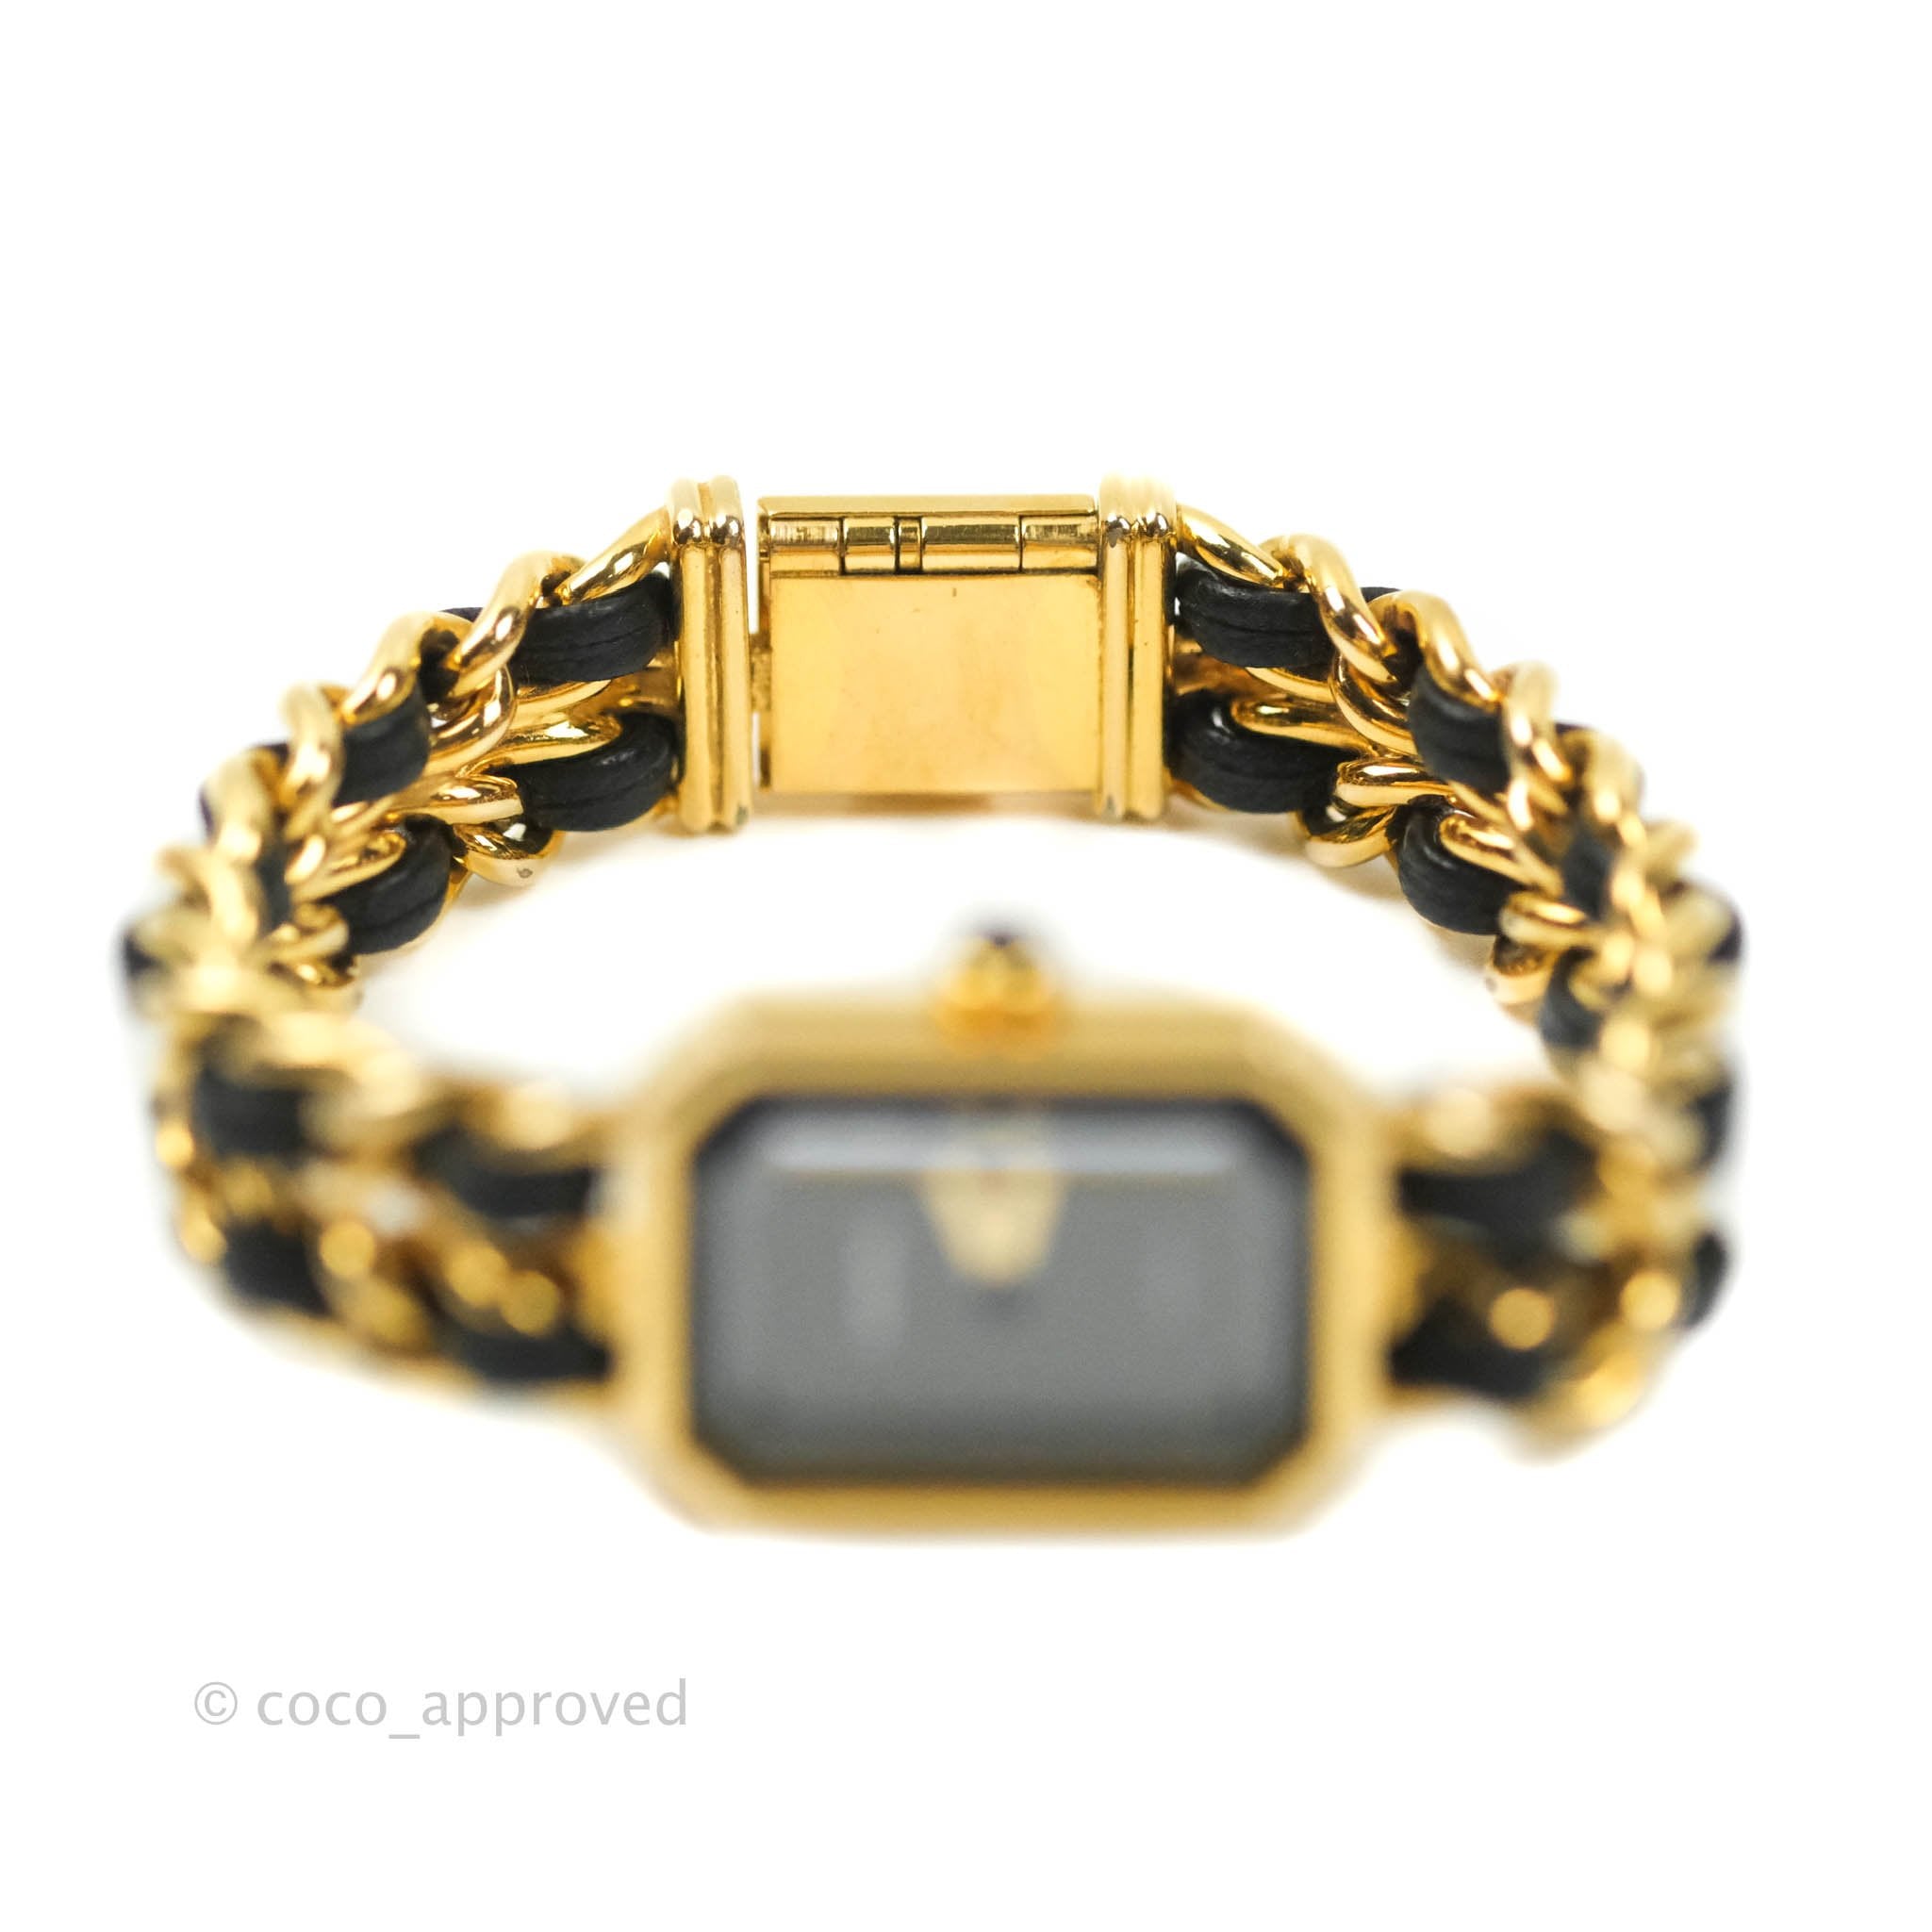 Chanel Vintage Première Watch Black Leather Gold Plated M Size – Coco  Approved Studio